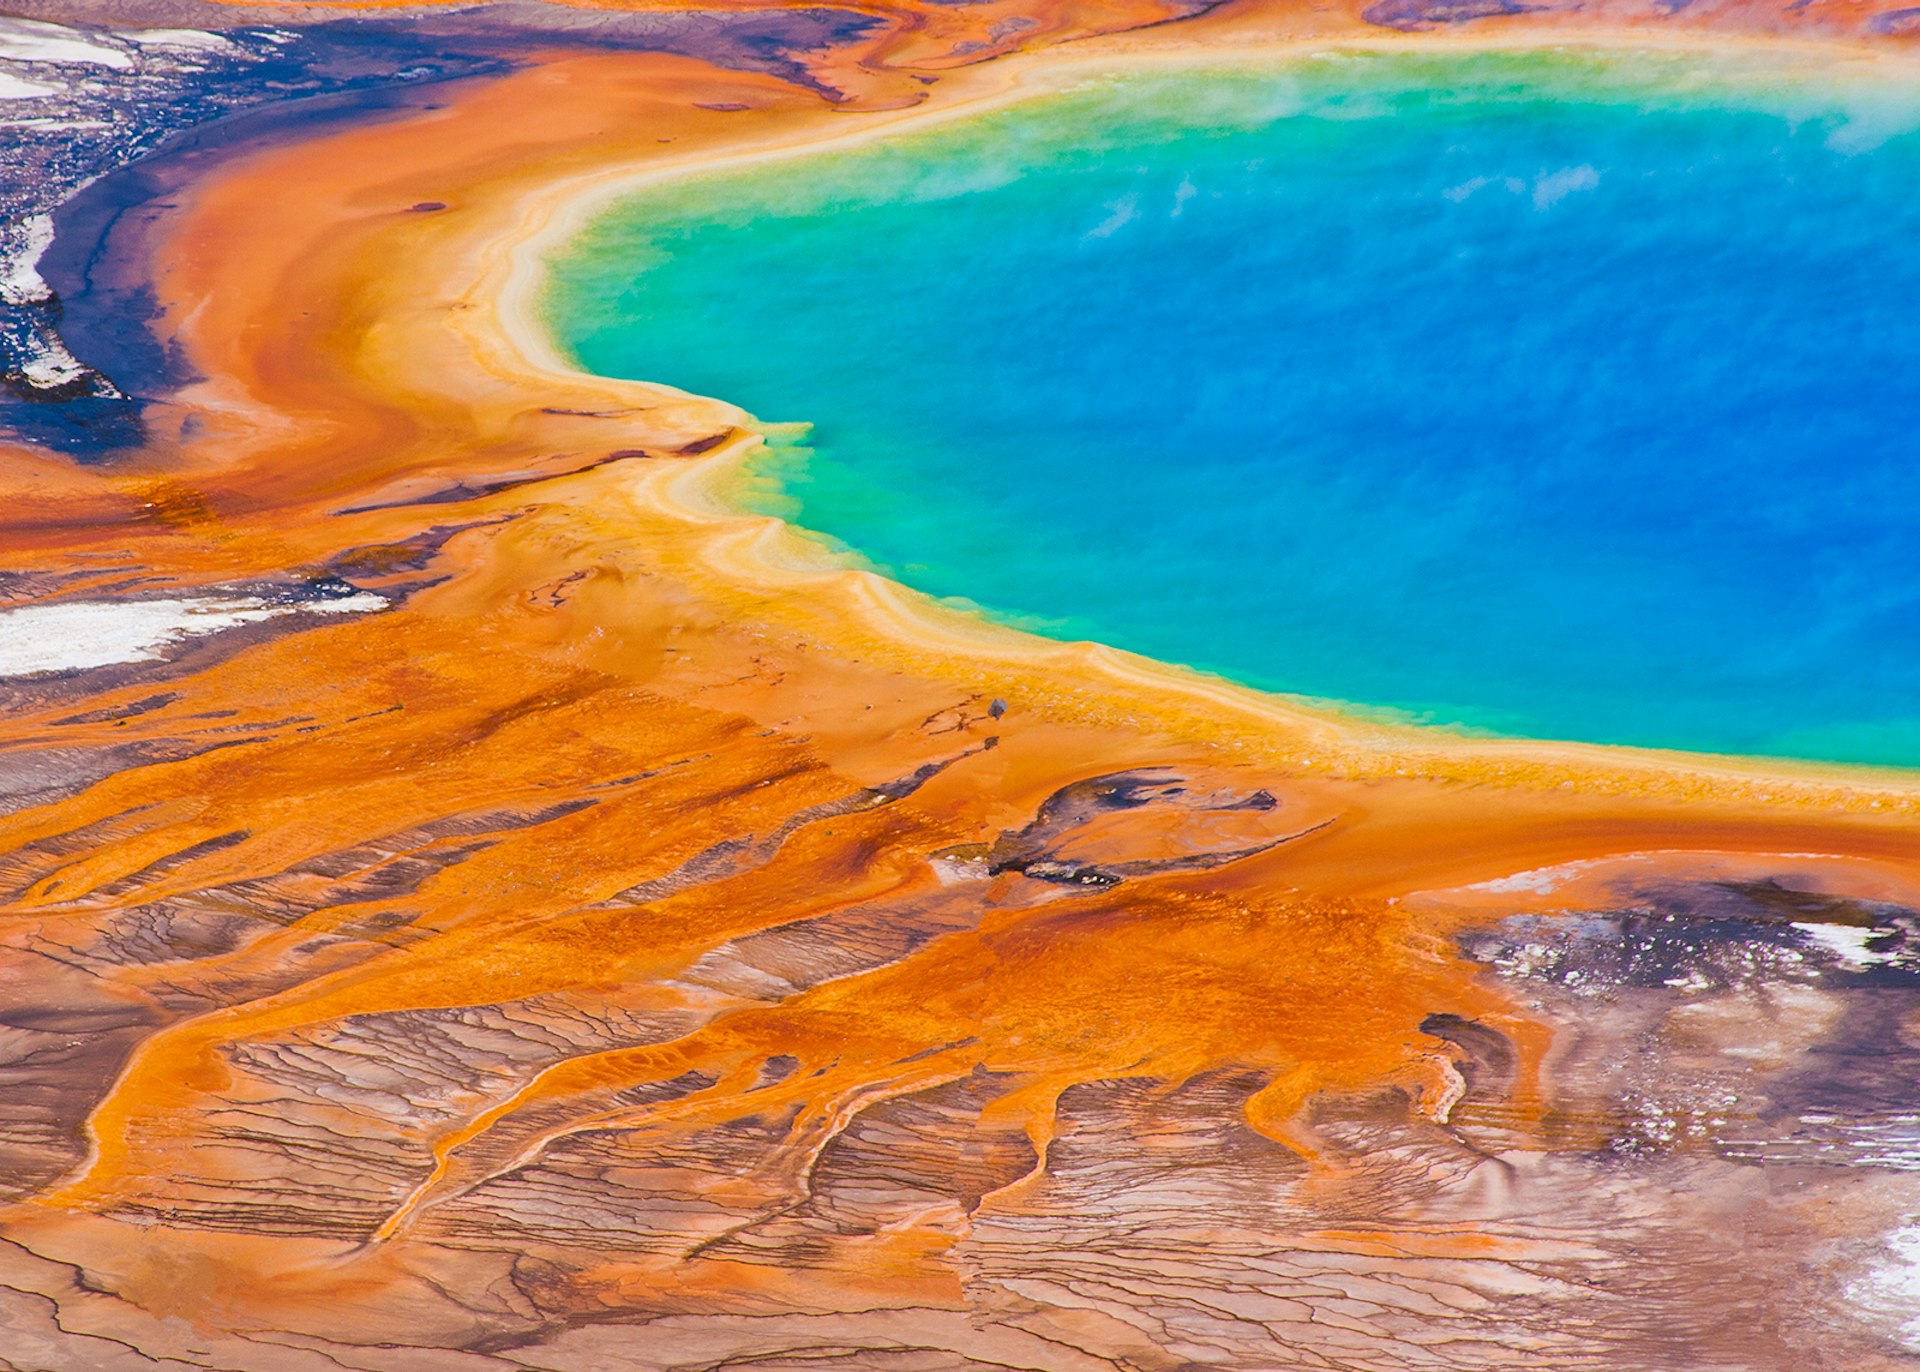 The Grand Prismatic Spring in America's Yellowstone National Park © Lorcel / Shutterstock